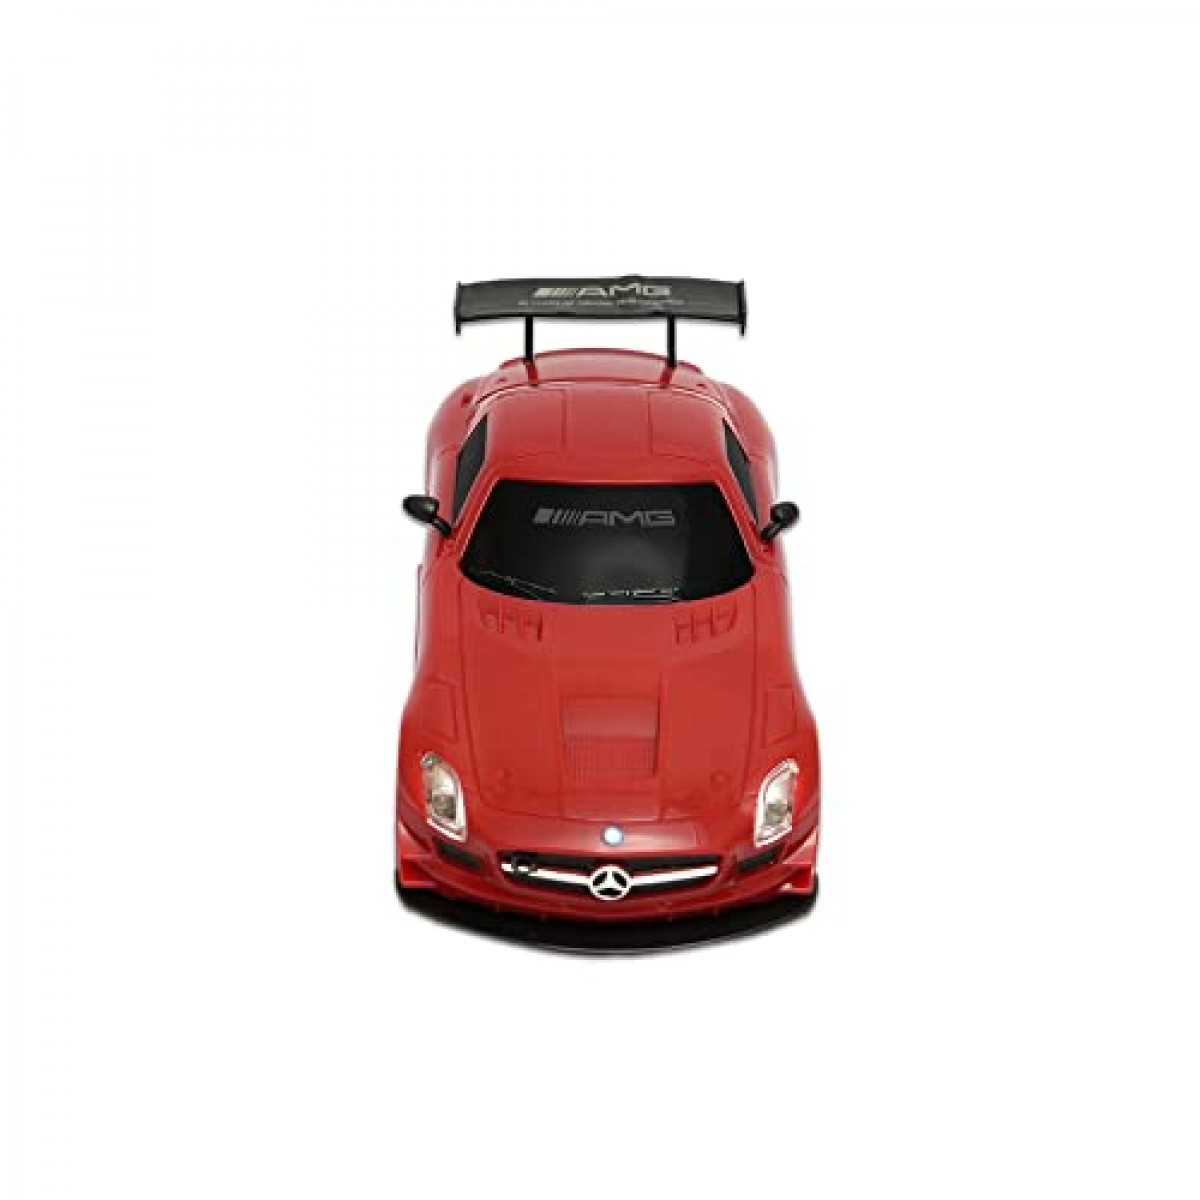 Road Burner Rechargable Remote Control Car for Kids Mercedes Benz SLS AMG GT3 Full Function, 1:24 Scale Pack of 1, Red, Age 6Y+